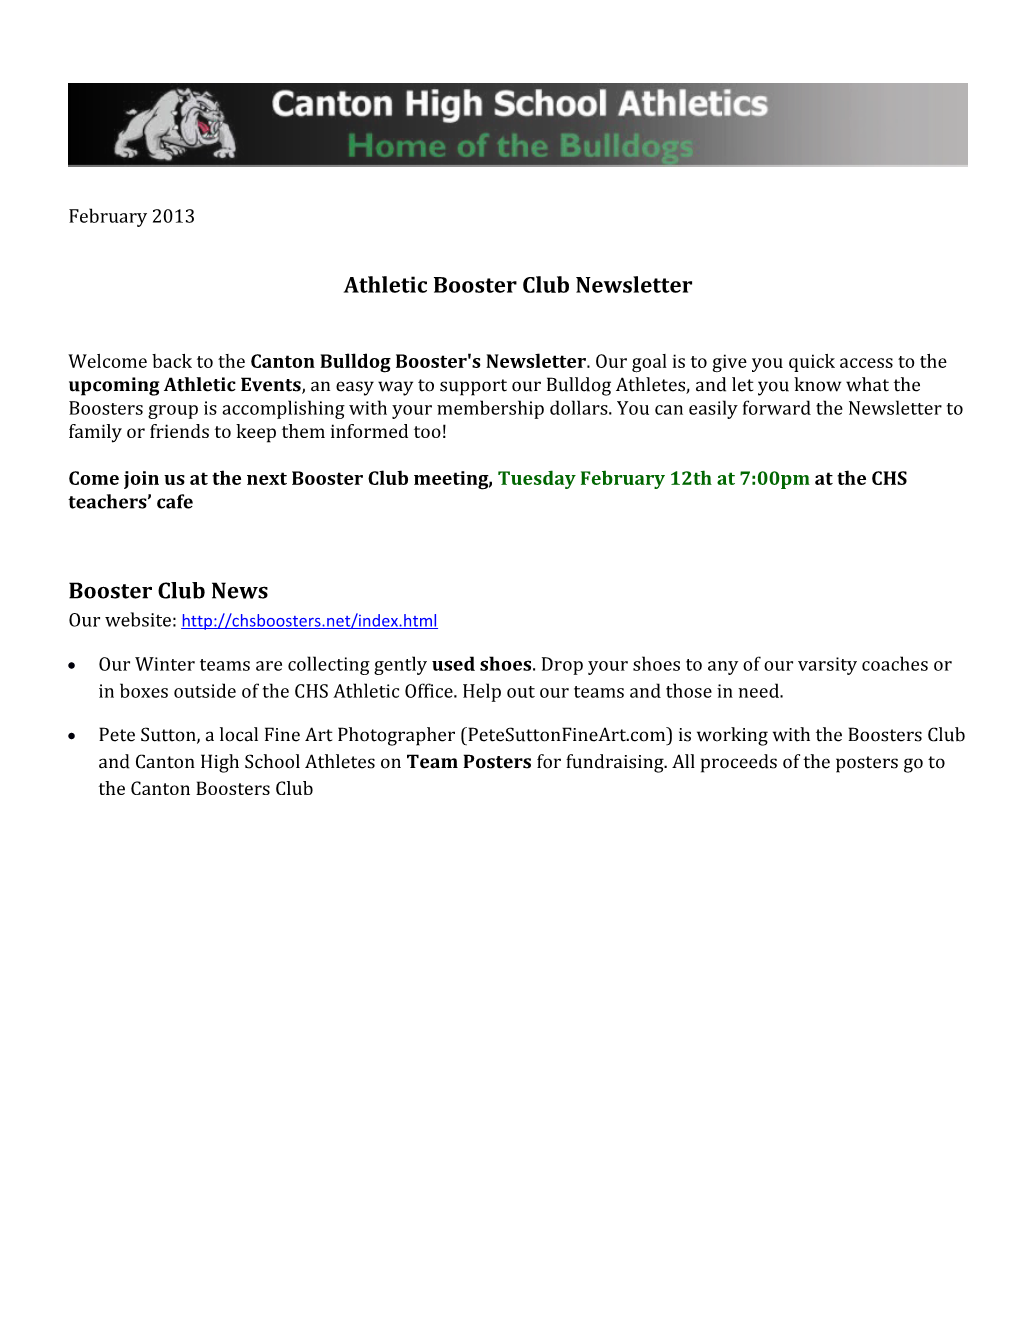 Athletic Booster Club Newsletter